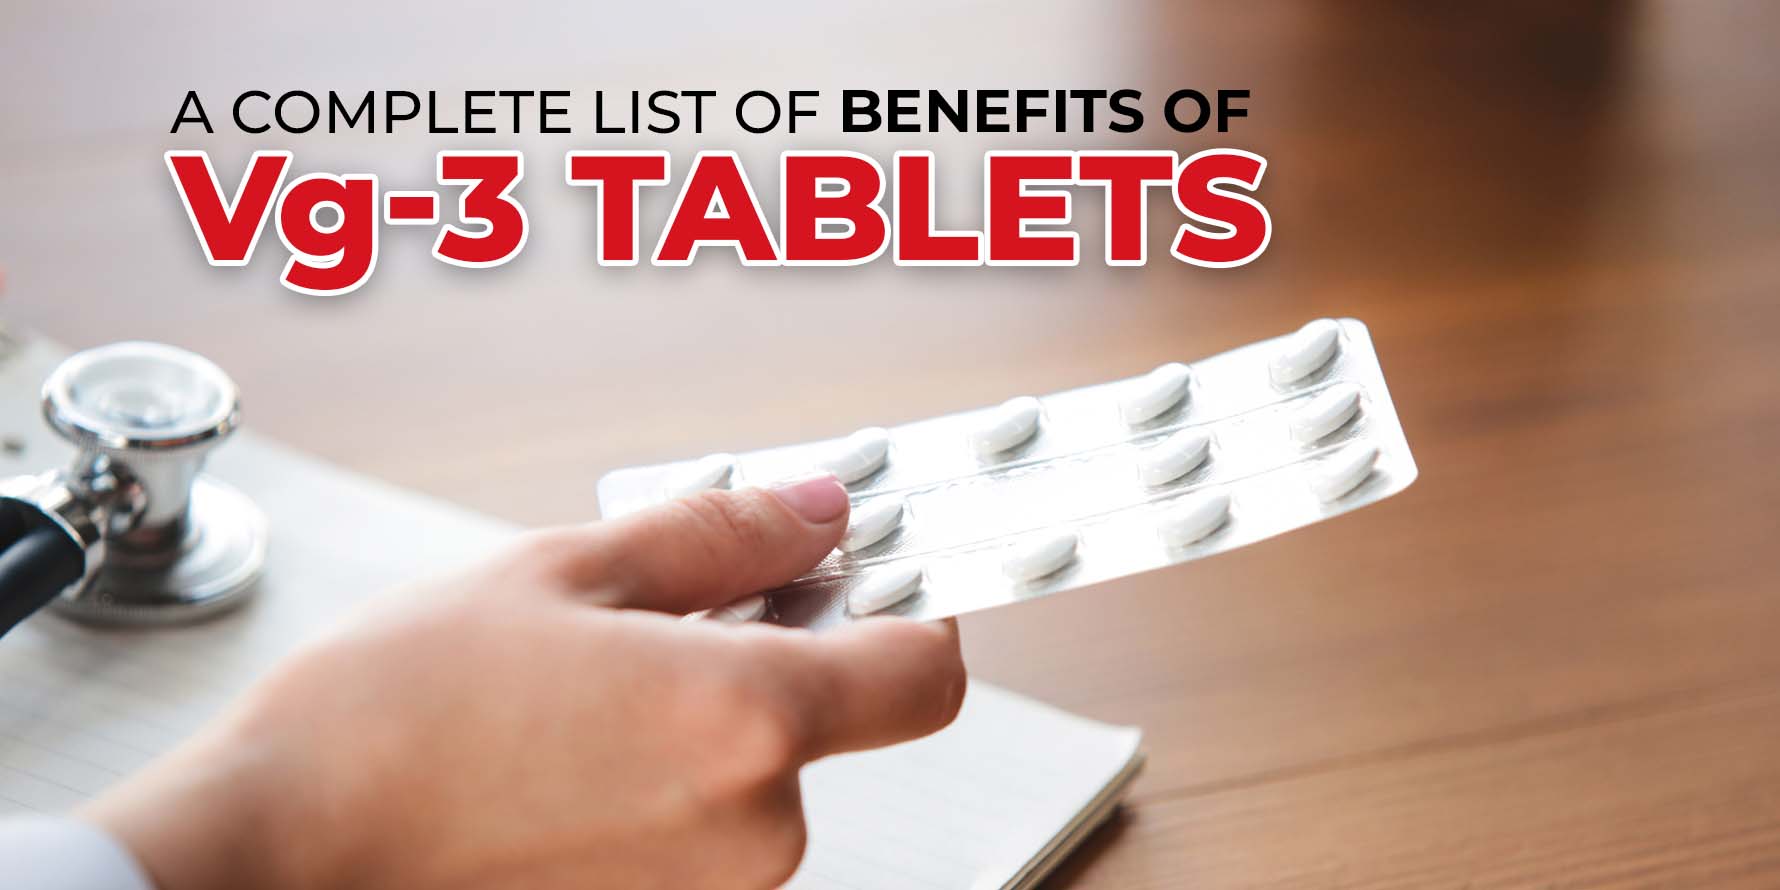 A Complete List of Benefits of vg3 Tablets